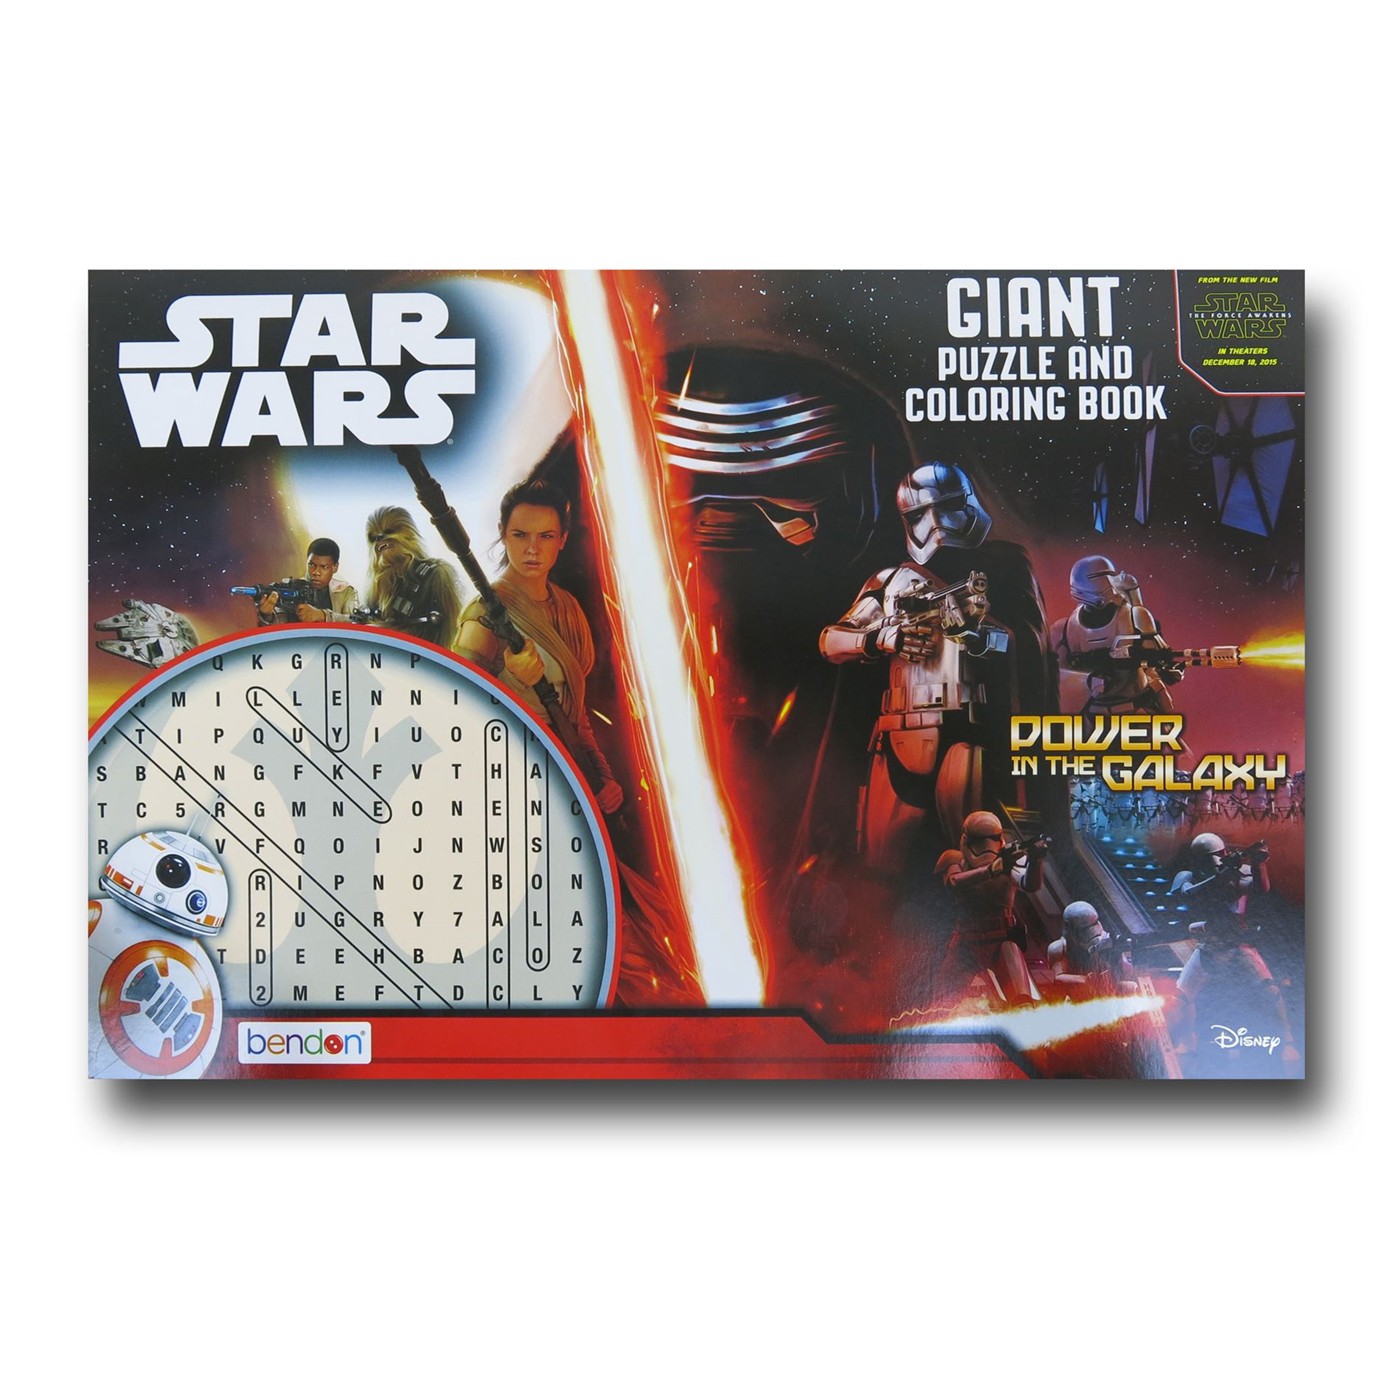 Star Wars Force Awakens Puzzle and Coloring Book